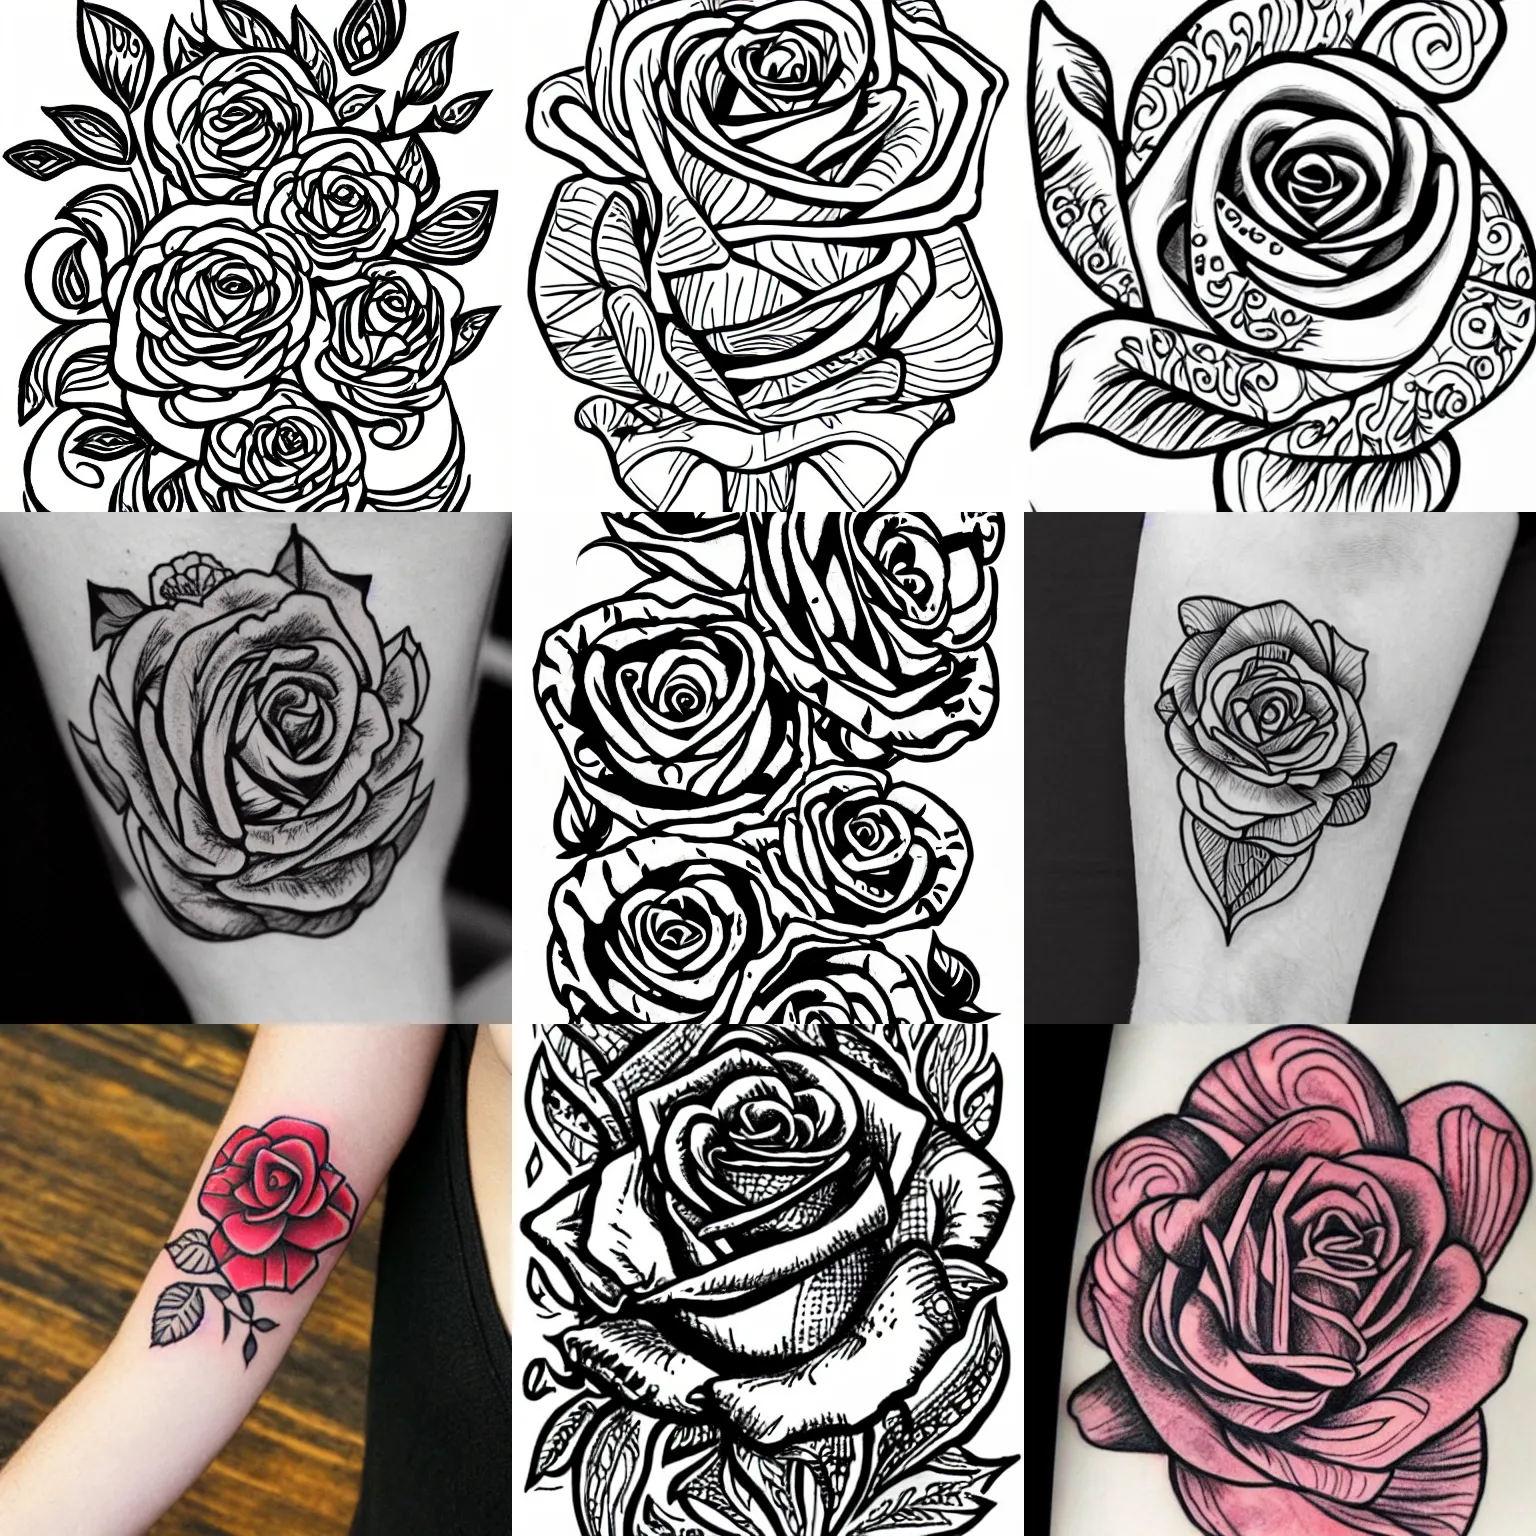 The Skin Canvas  Colored Rose Tattoo  Facebook